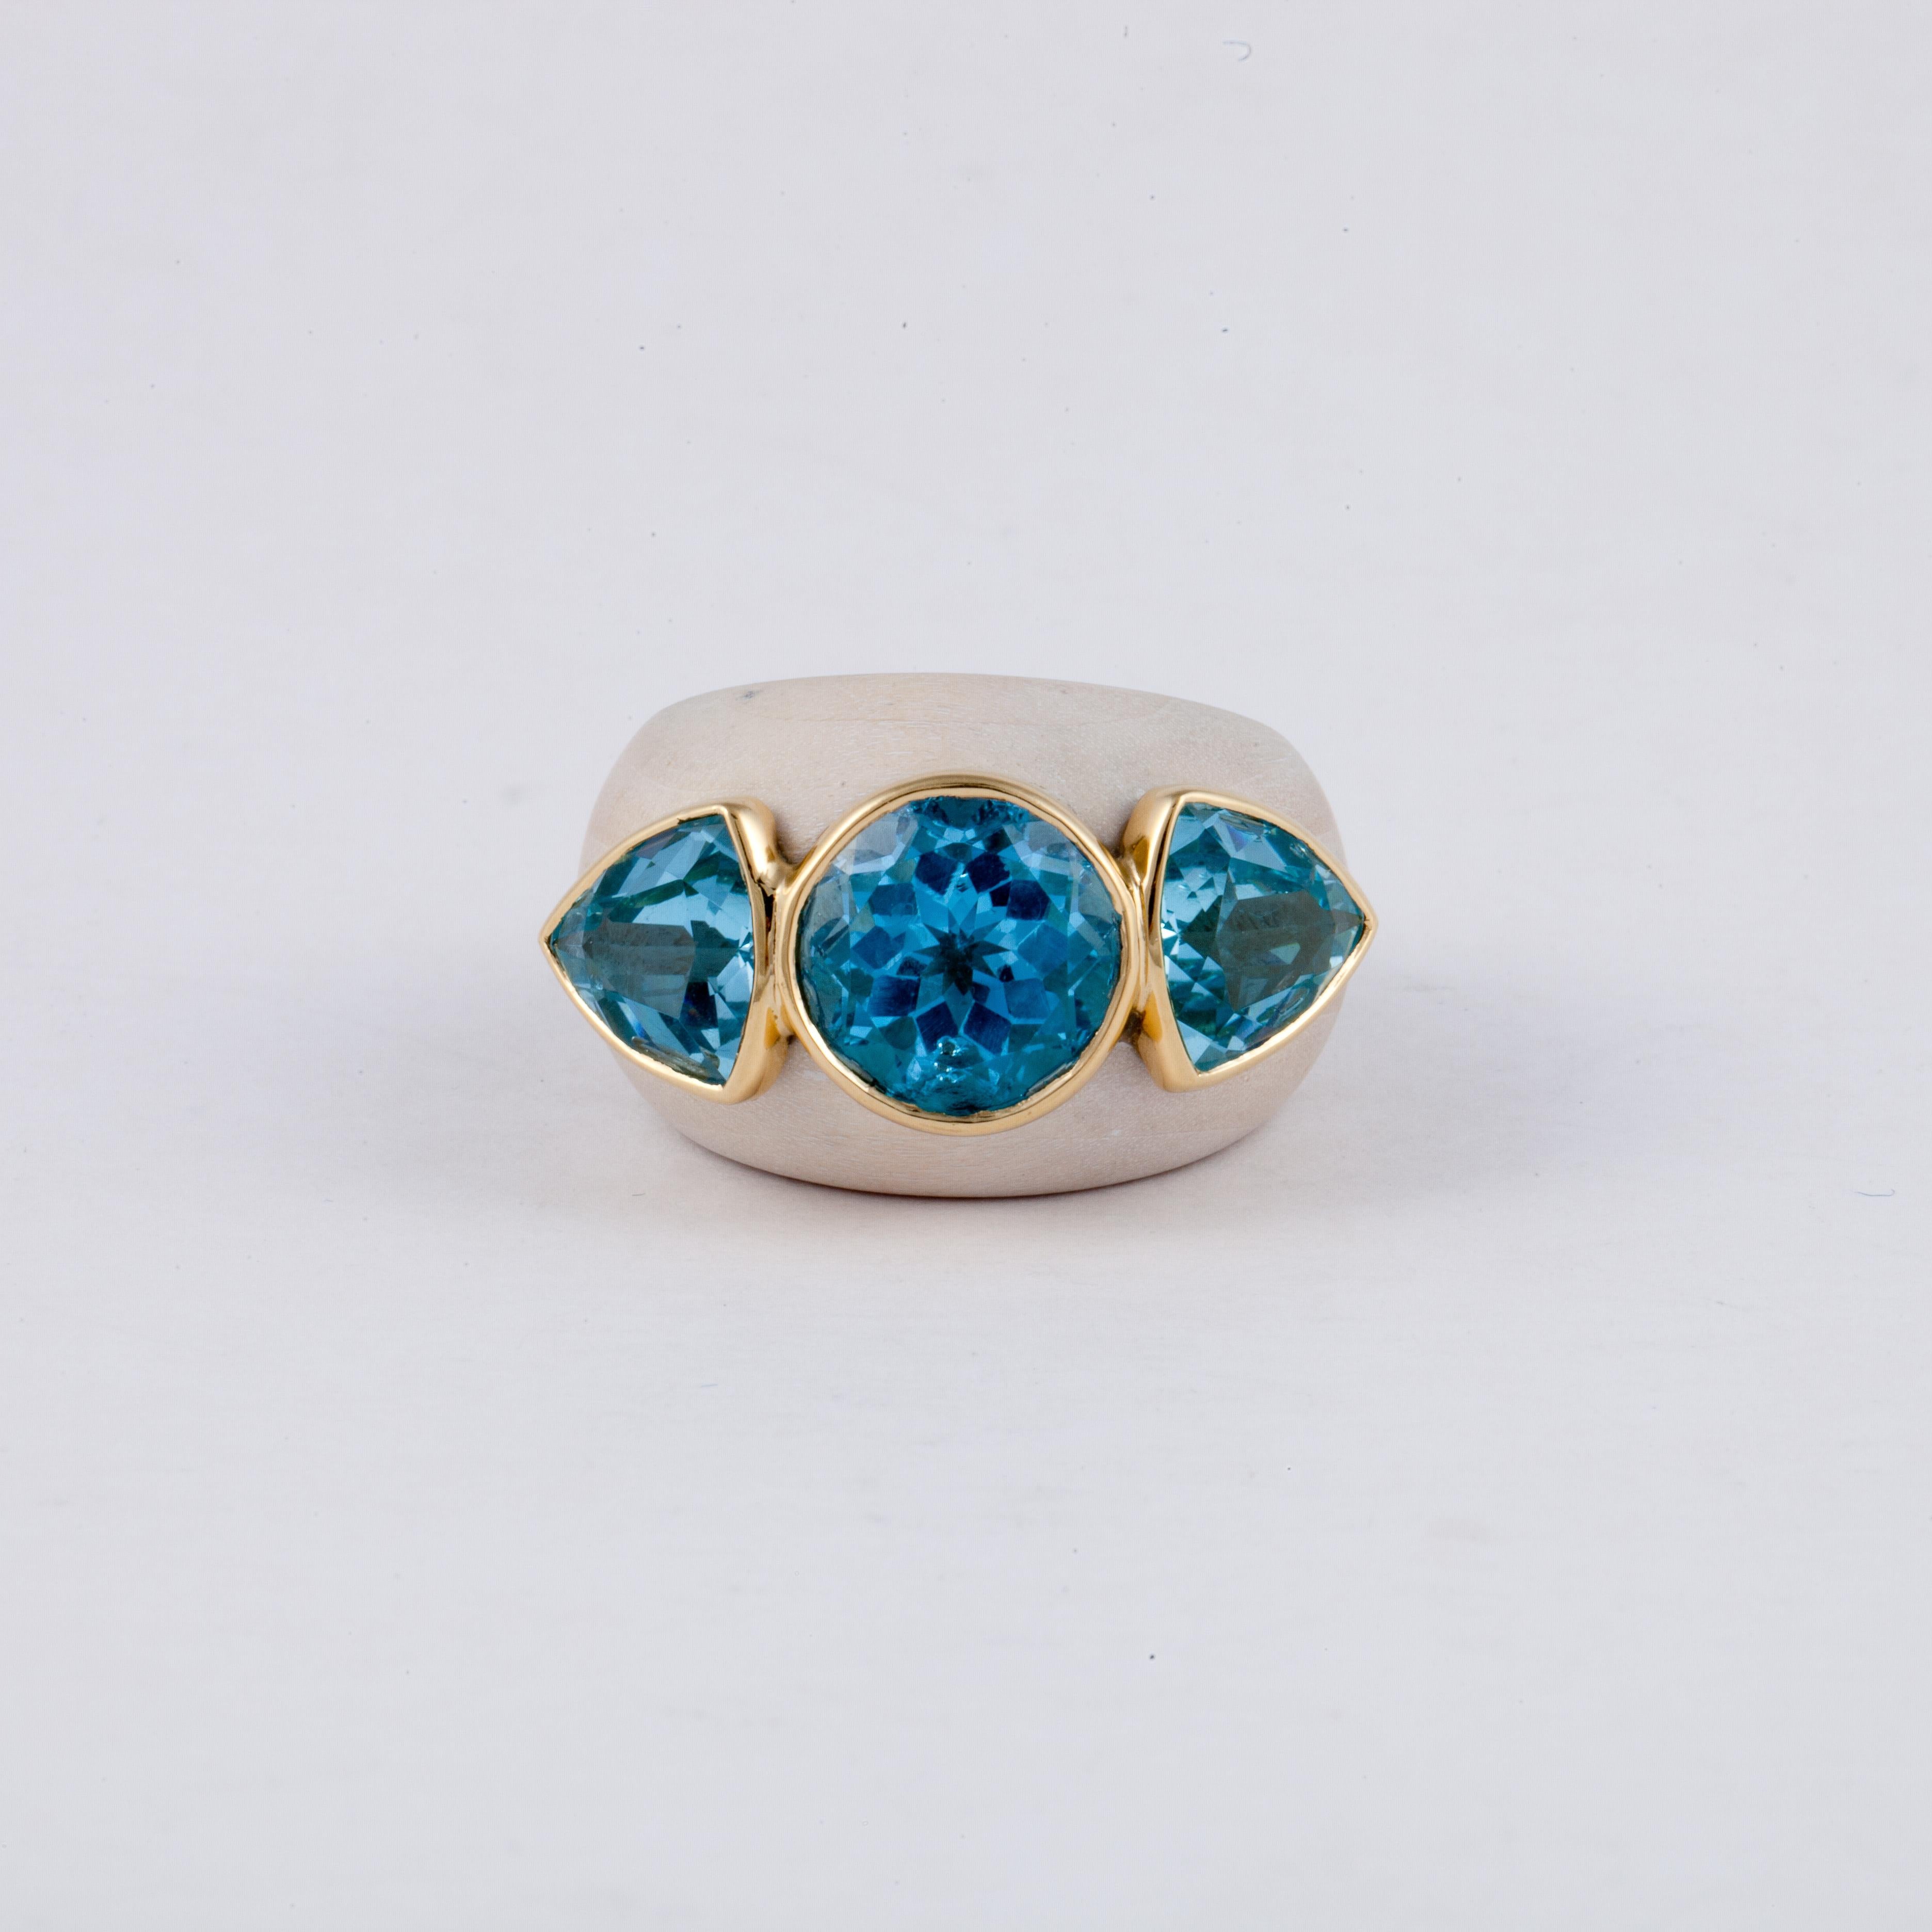 Francesca Visconti ring composed of wood with yellow gold lining on the inside.  The ring features three blue topaz stones that are bezel set in yellow gold.  It measures 1 1/4 inches by 3/4 inches.  